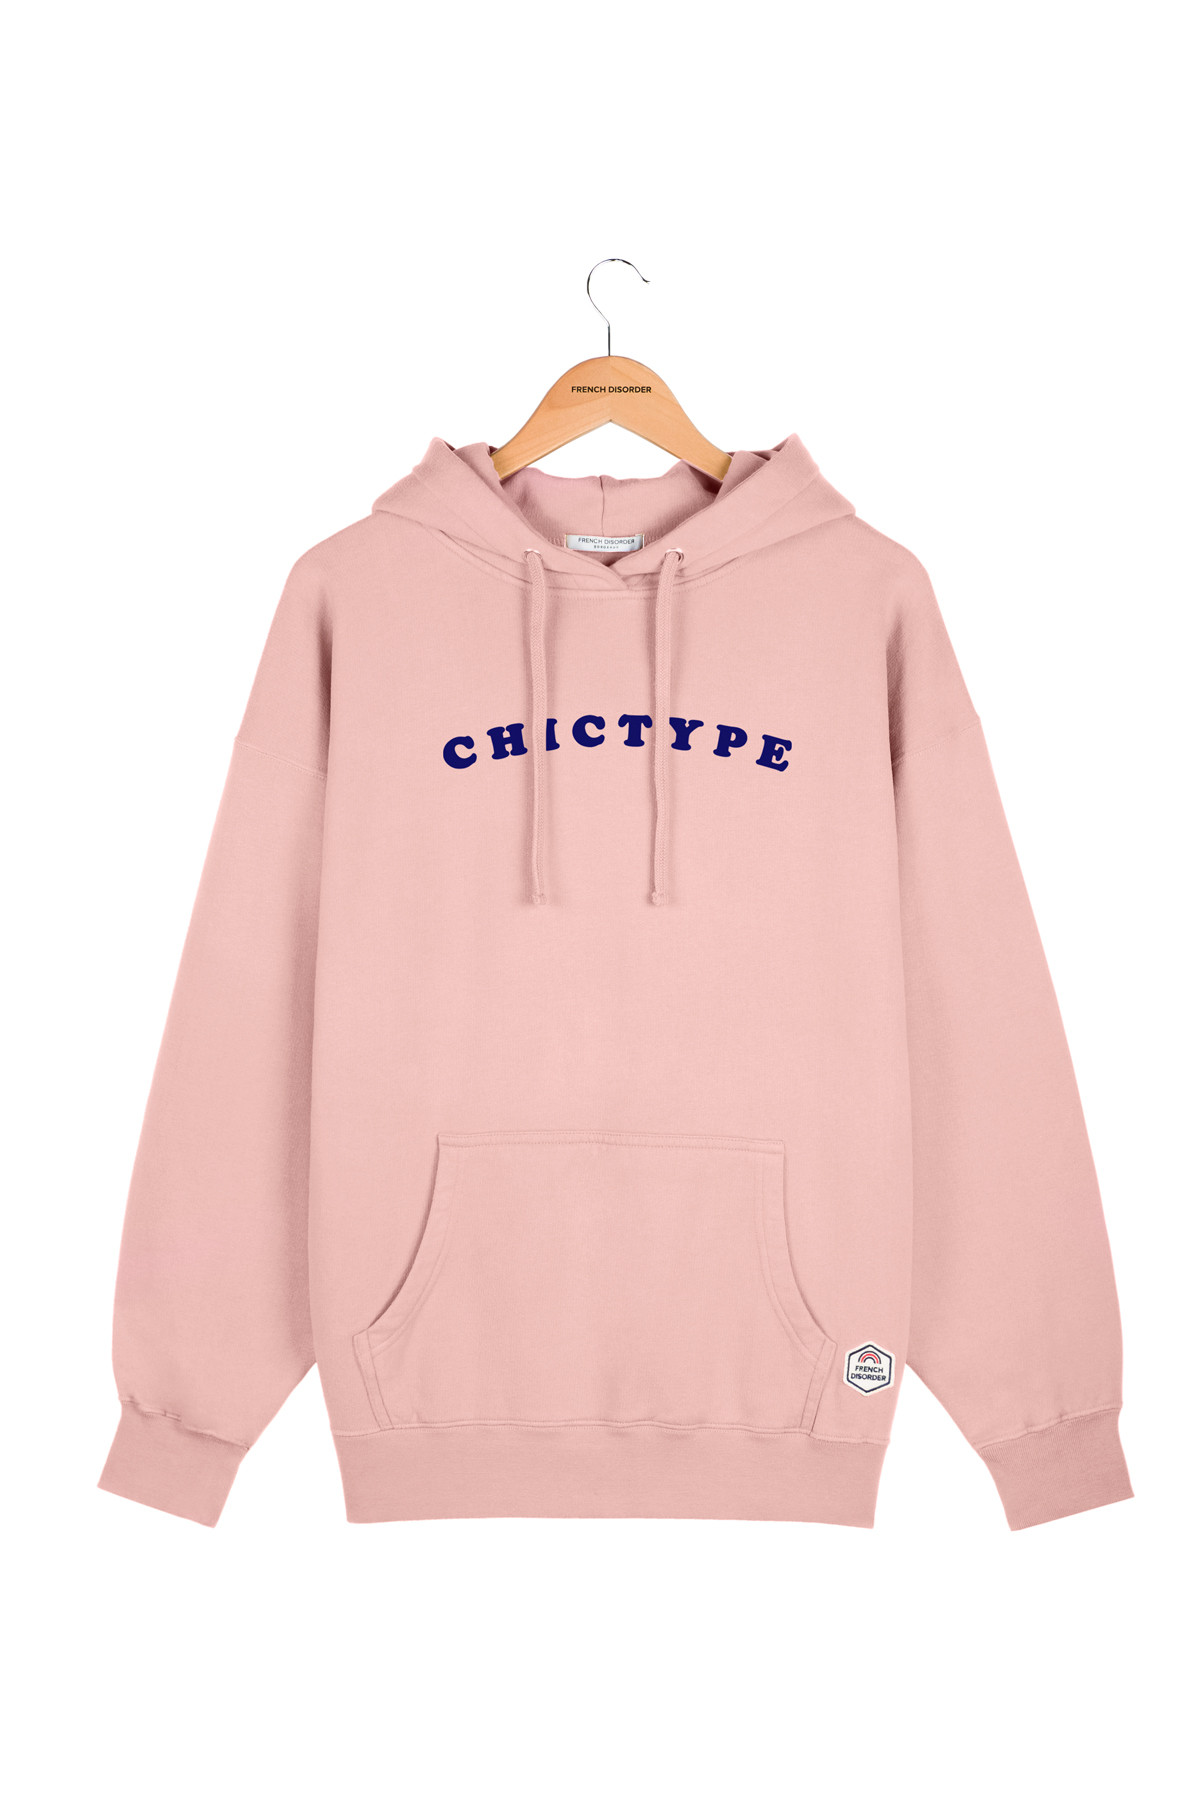 Photo de SWEATS À CAPUCHE Hoodie CHICTYPE chez French Disorder